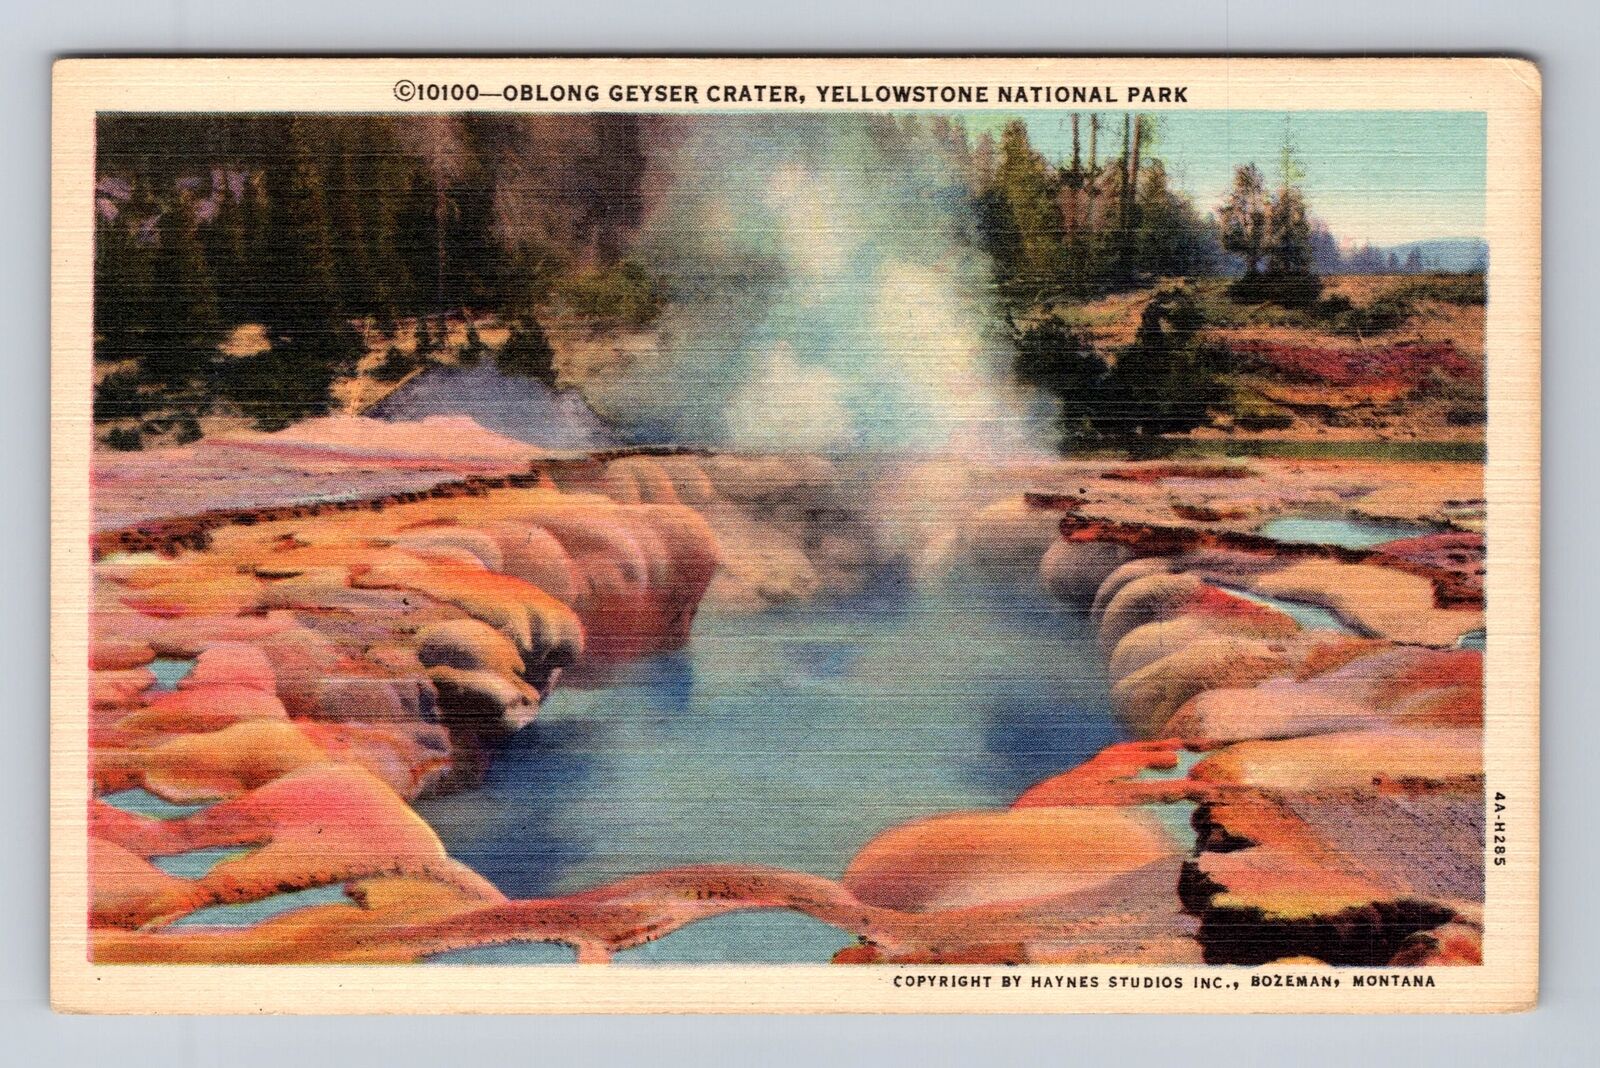 Yellowstone National Park, Oblong Geyser Crater, Series #10100, Vintage Postcard